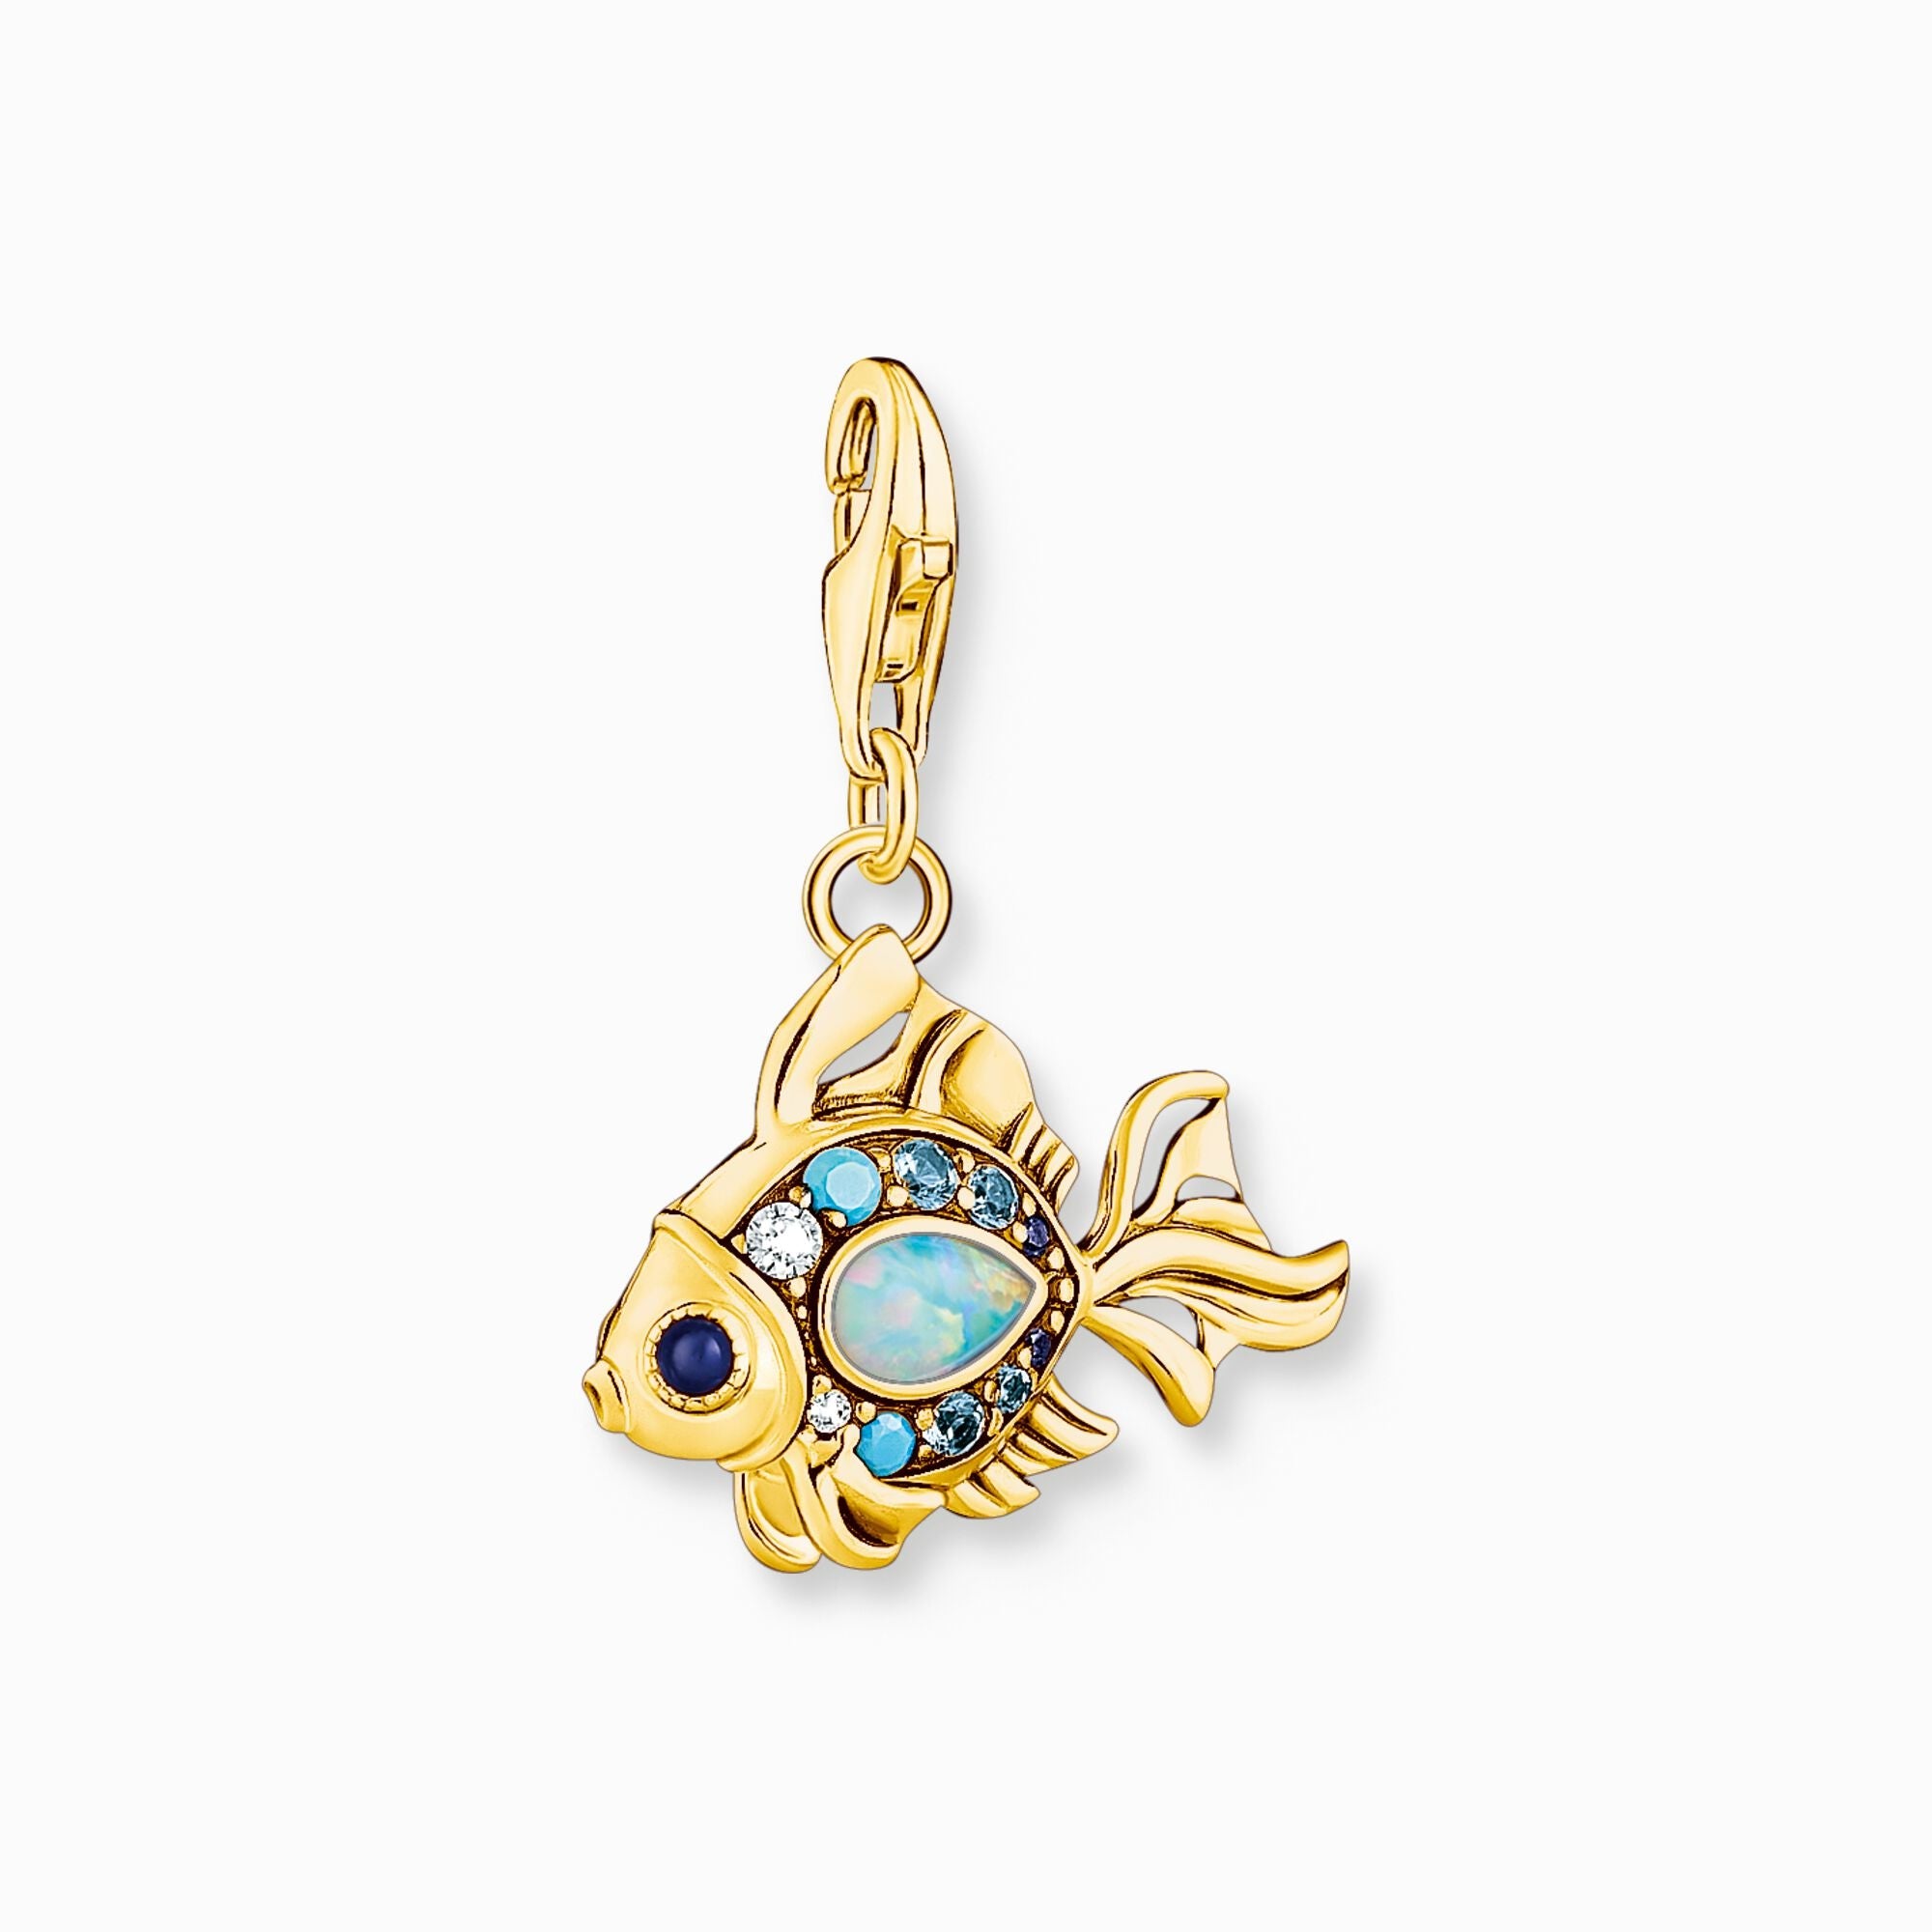 Thomas Sabo Charm Club Gold Plated Sterling Silver Colourful Fish Charm